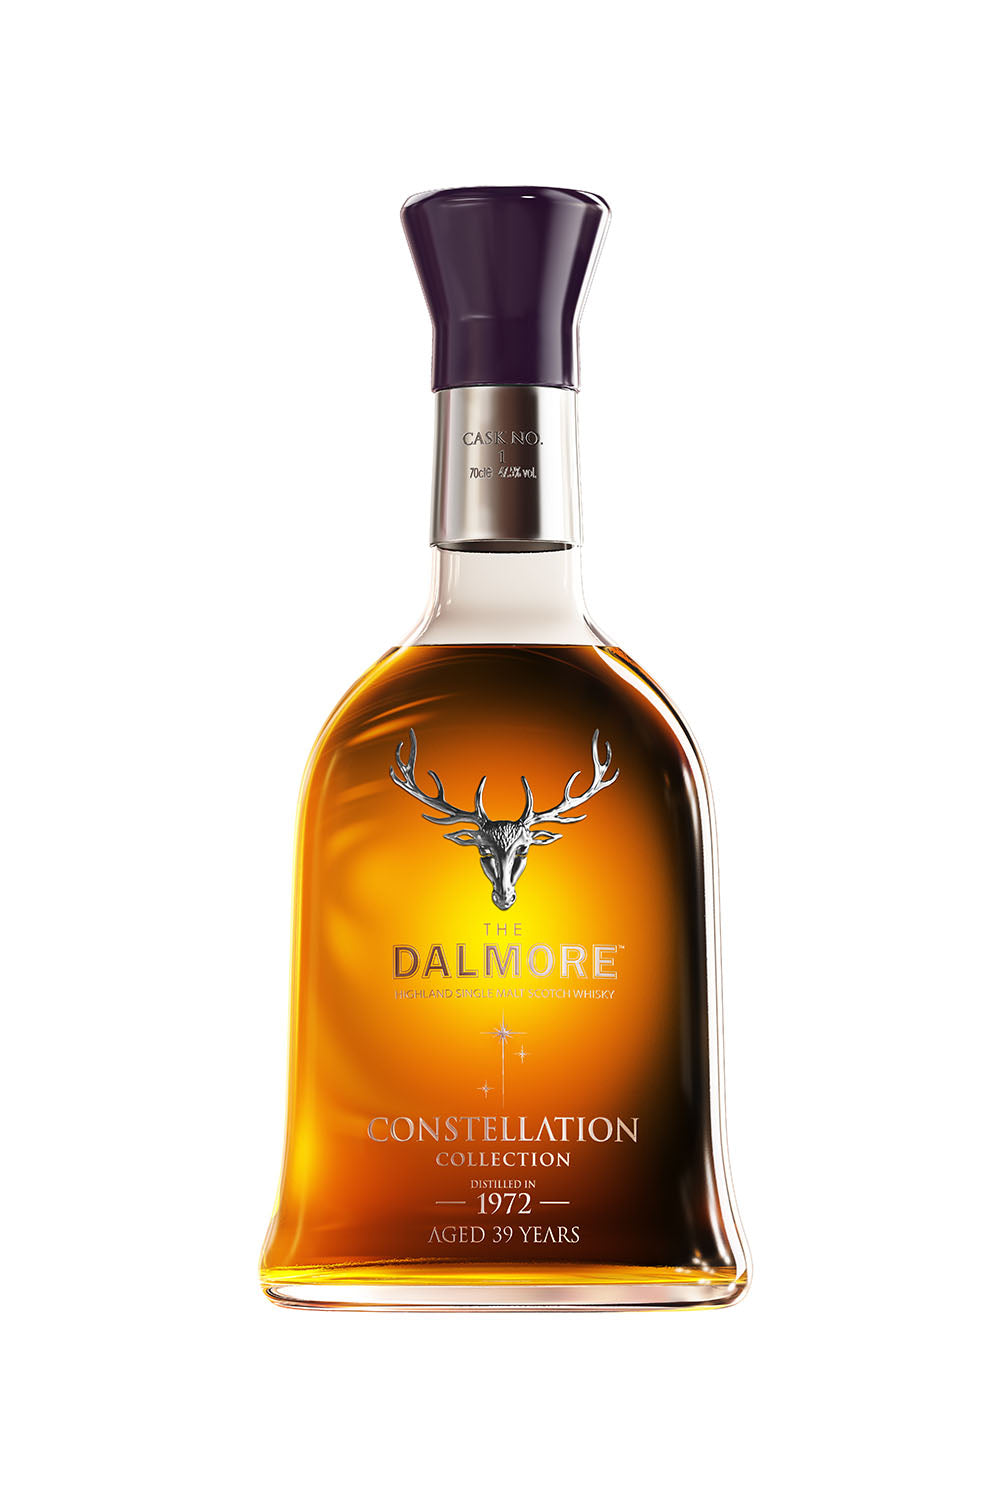 The Dalmore 1971 Constellation - Cask 1